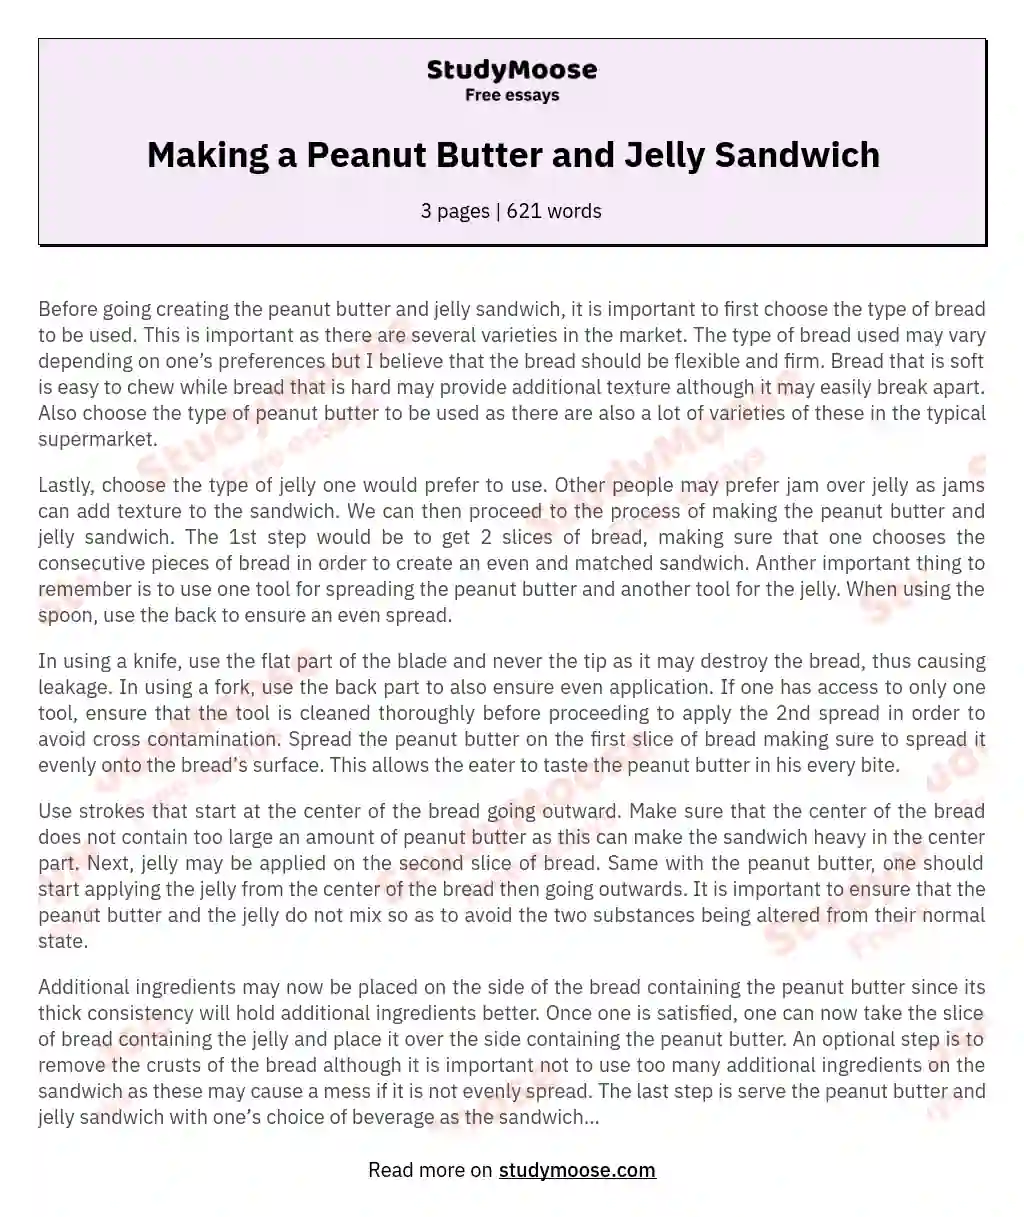 Making a Peanut Butter and Jelly Sandwich essay